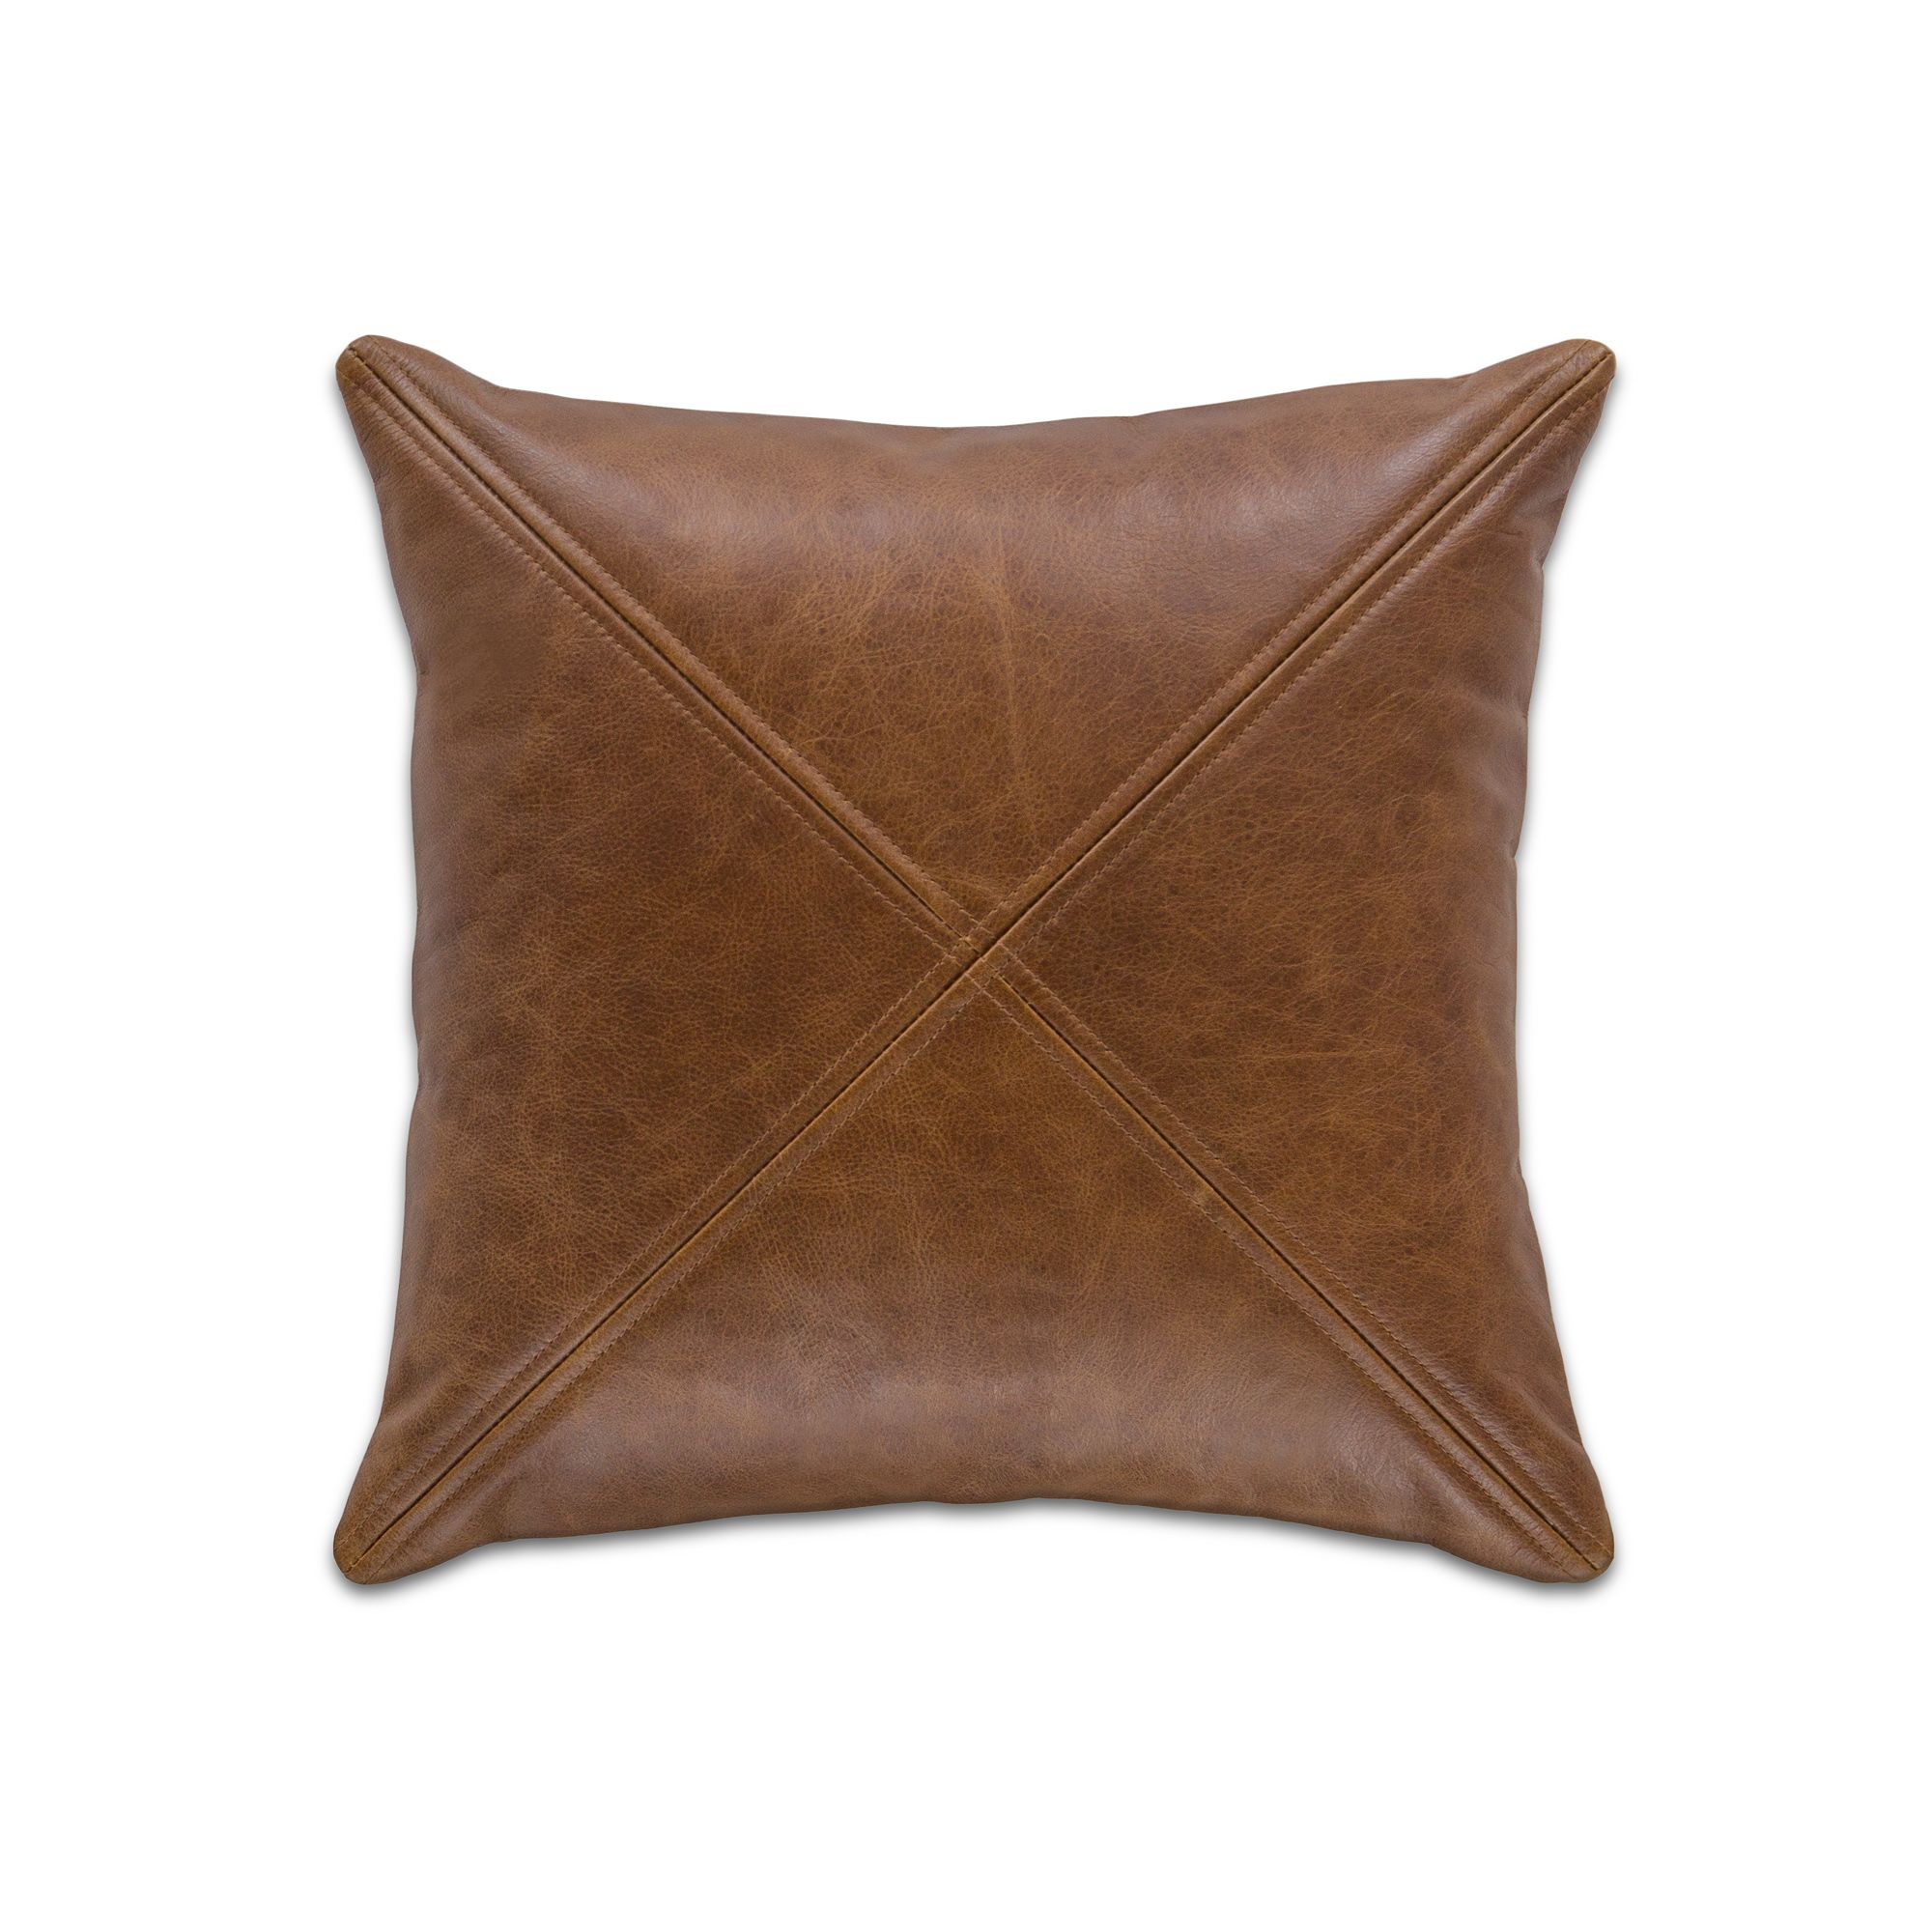 Scrunched Vintage Leather Cushion Cover